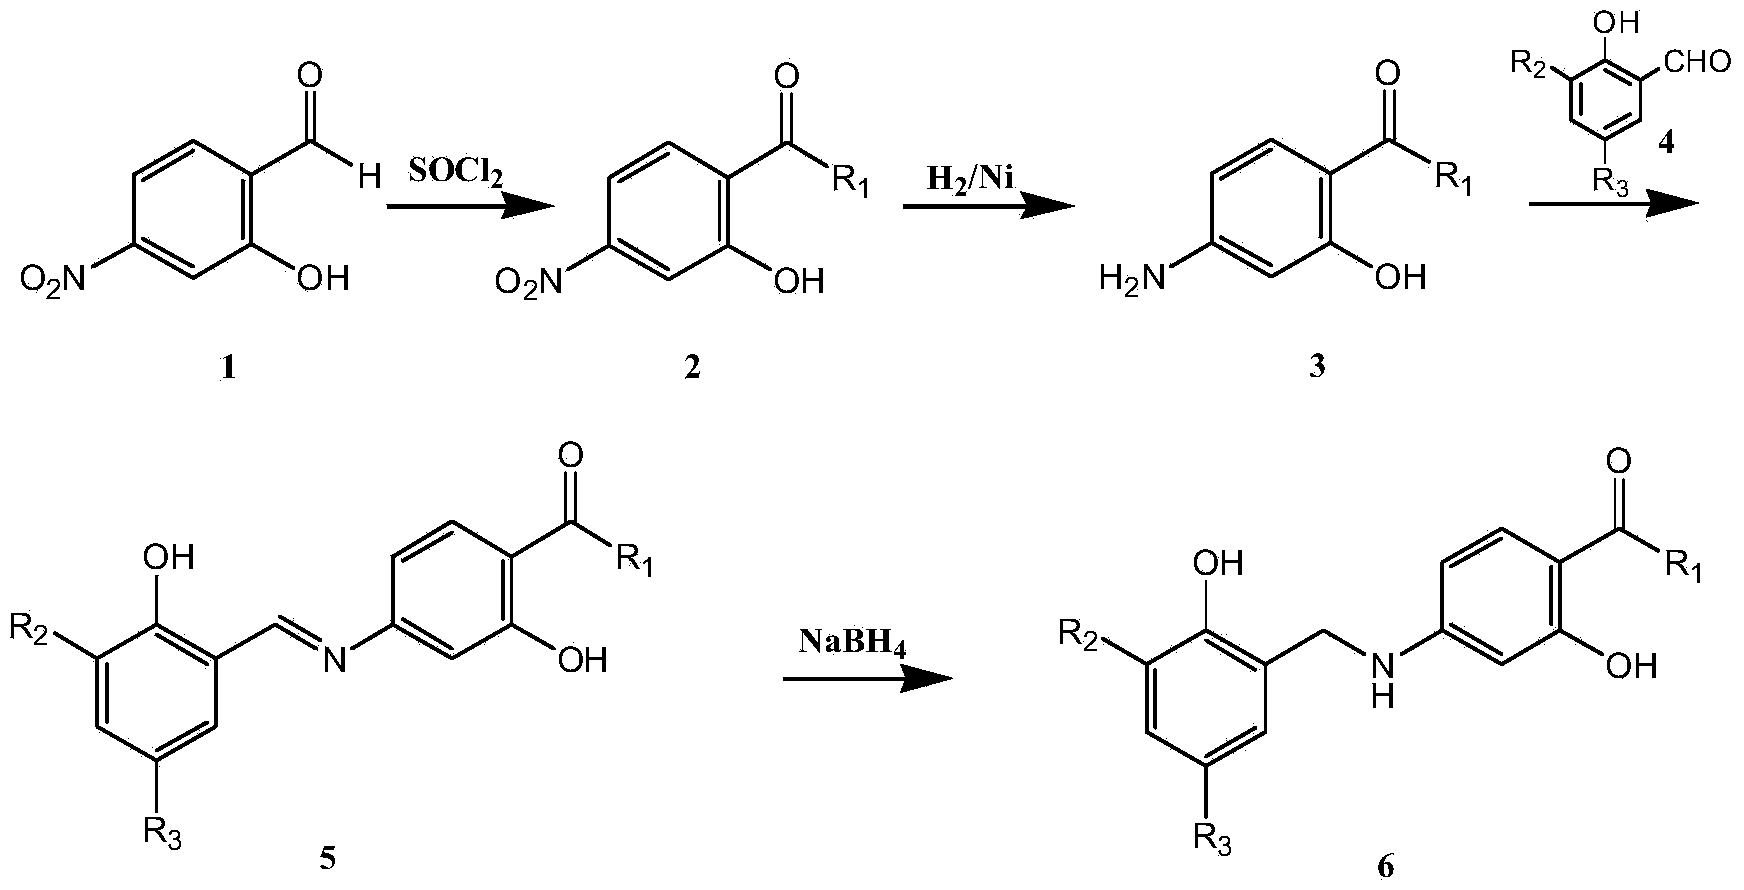 N-benzyl-substituted amide derivatives of amino salicylic acid and 4-aminobutyric acid and drug application of N-benzyl-substituted amide derivatives